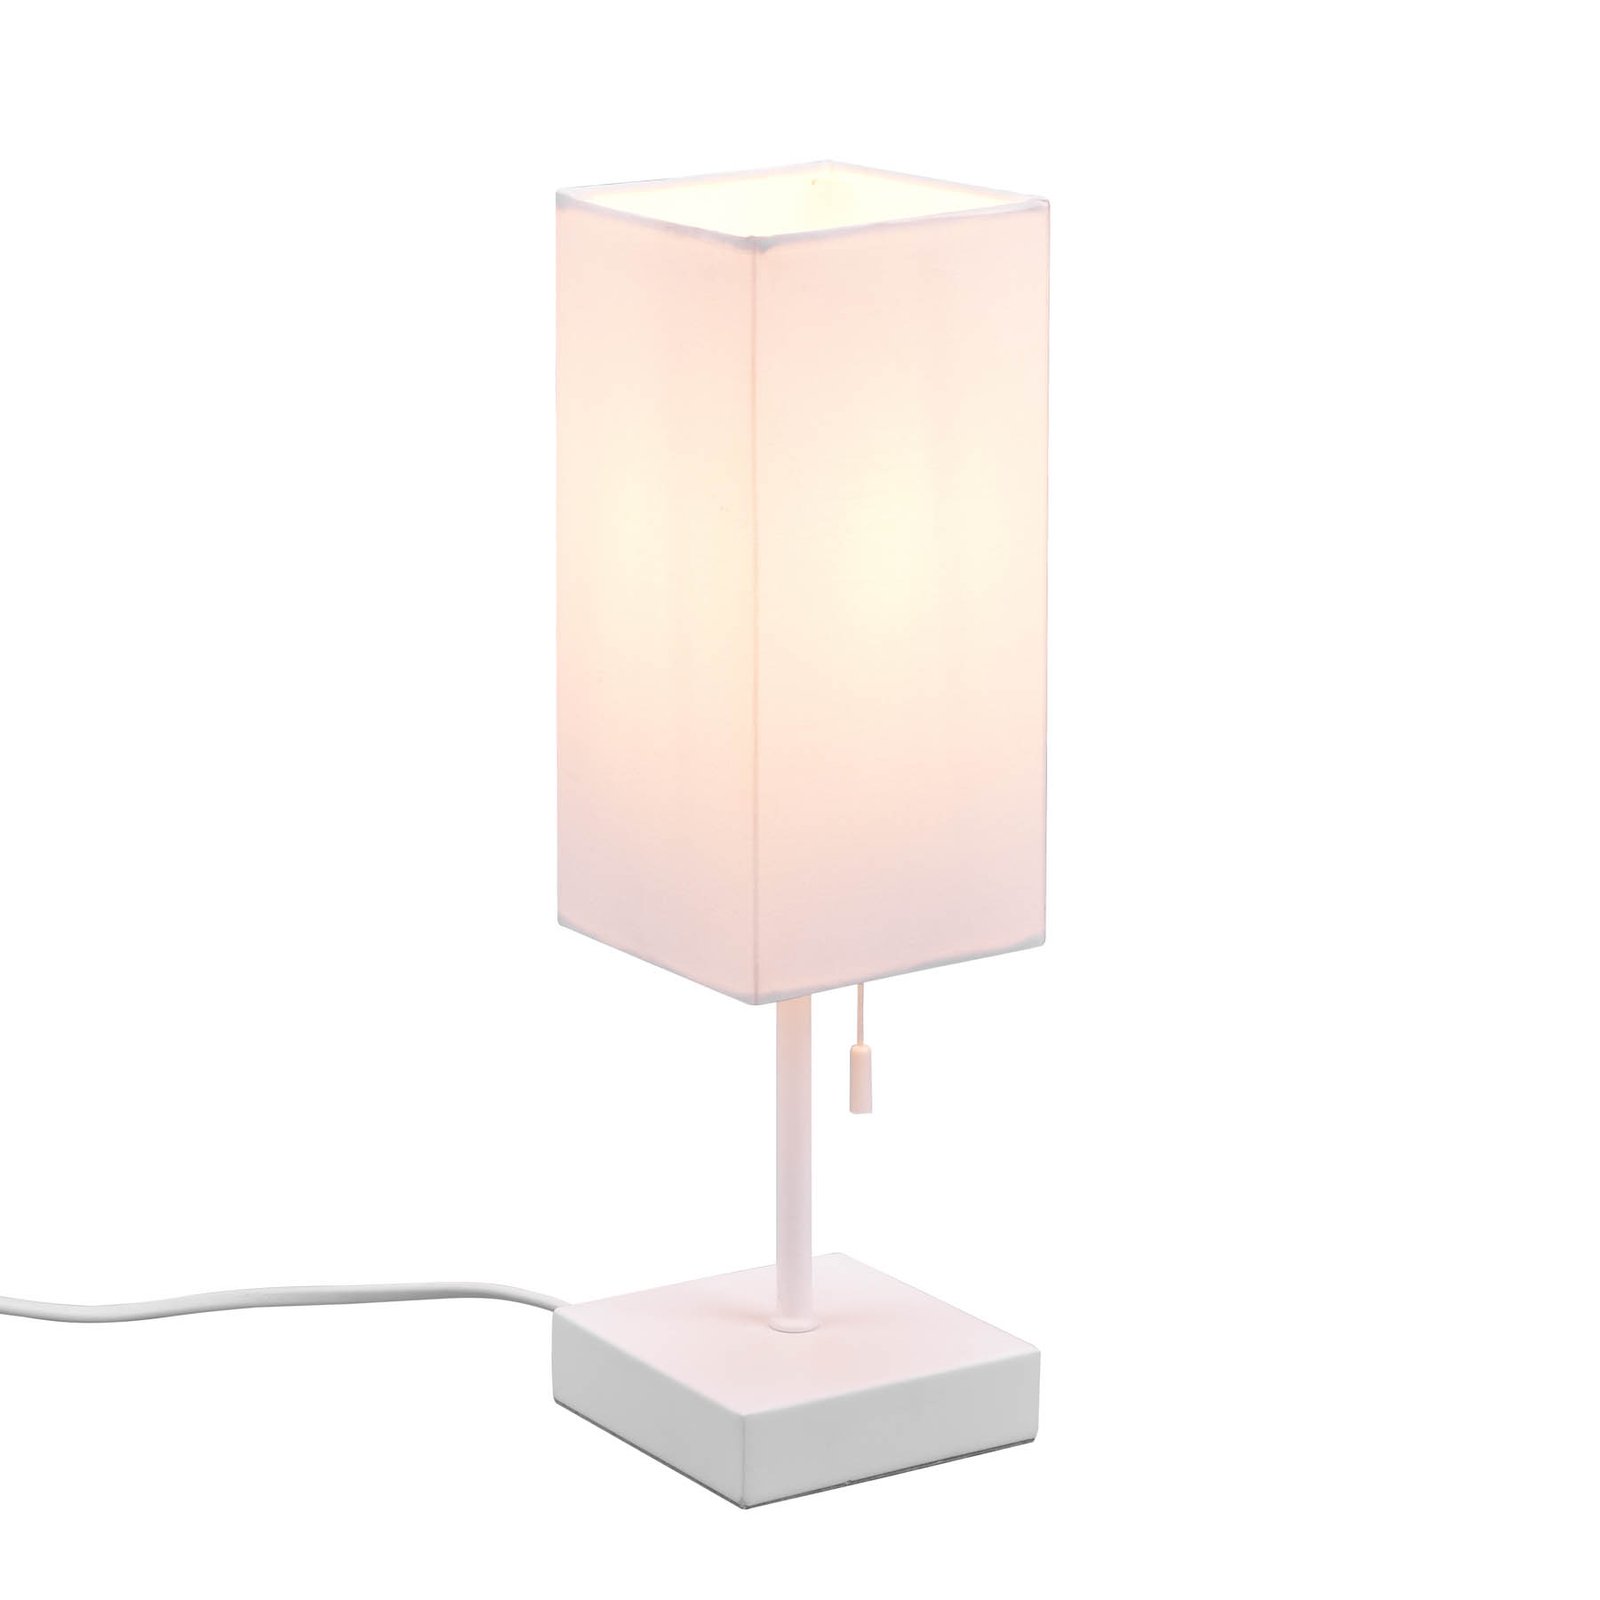 Ole table lamp with USB port, white/white